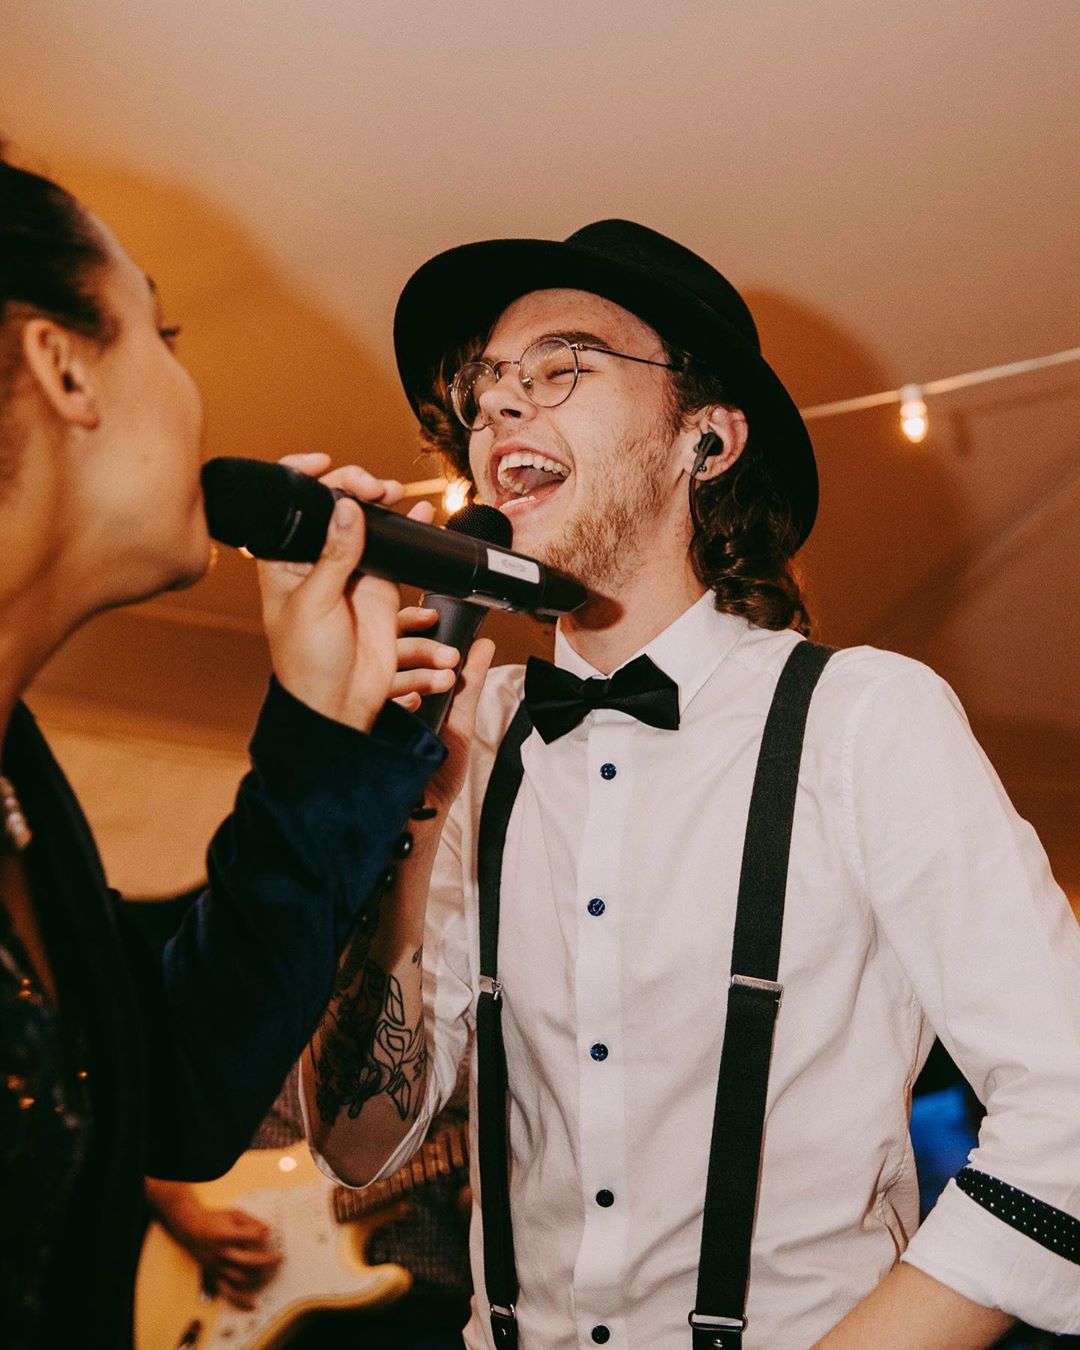 Party Guests Singing into Microphones at a Holiday Party. Photo by Instagram user @speechlessmusic